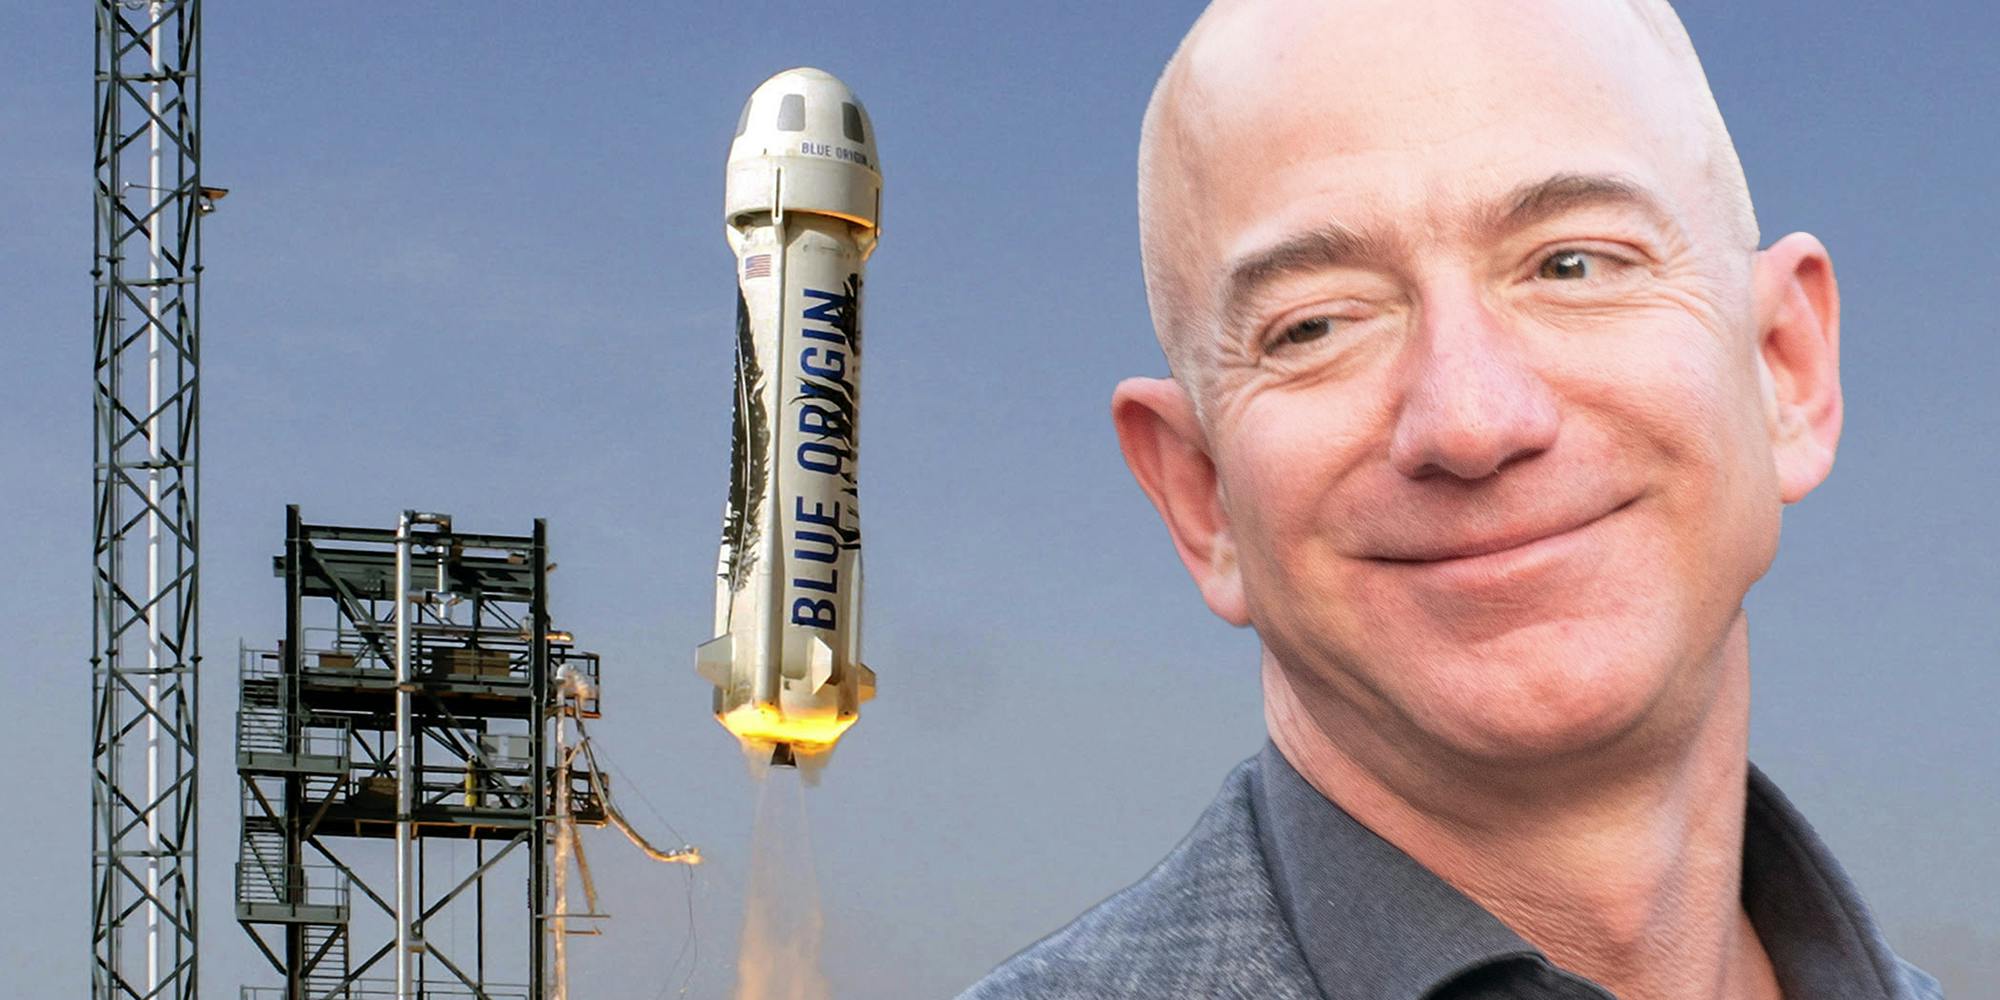 Jeff Bezos smiling and looking at Blue Origin spacecraft